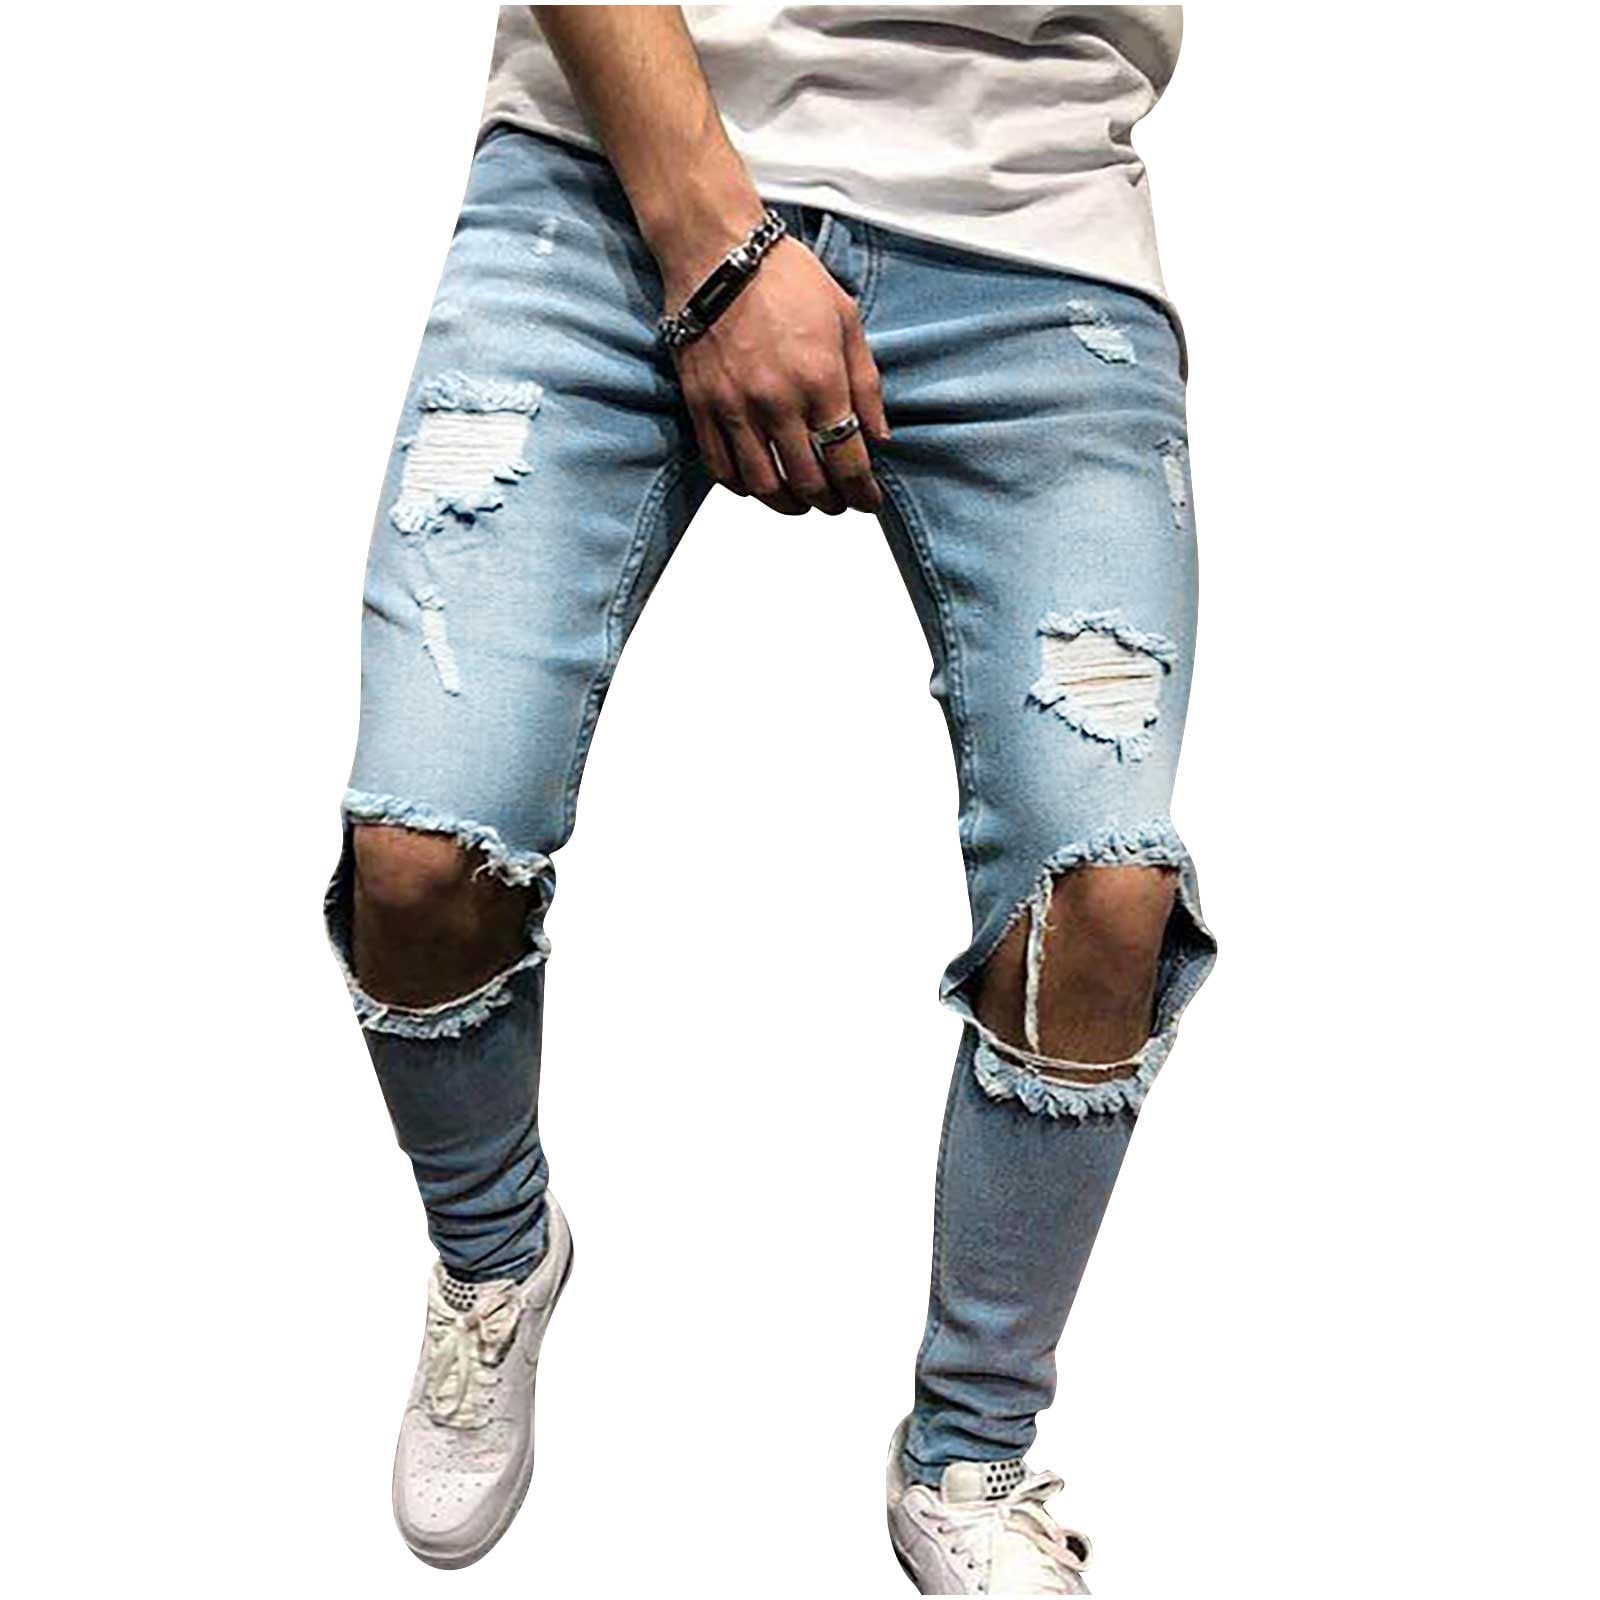 RQYYD Men's Plus Size Ripped Destroyed Jeans Stretchy Knee Holes